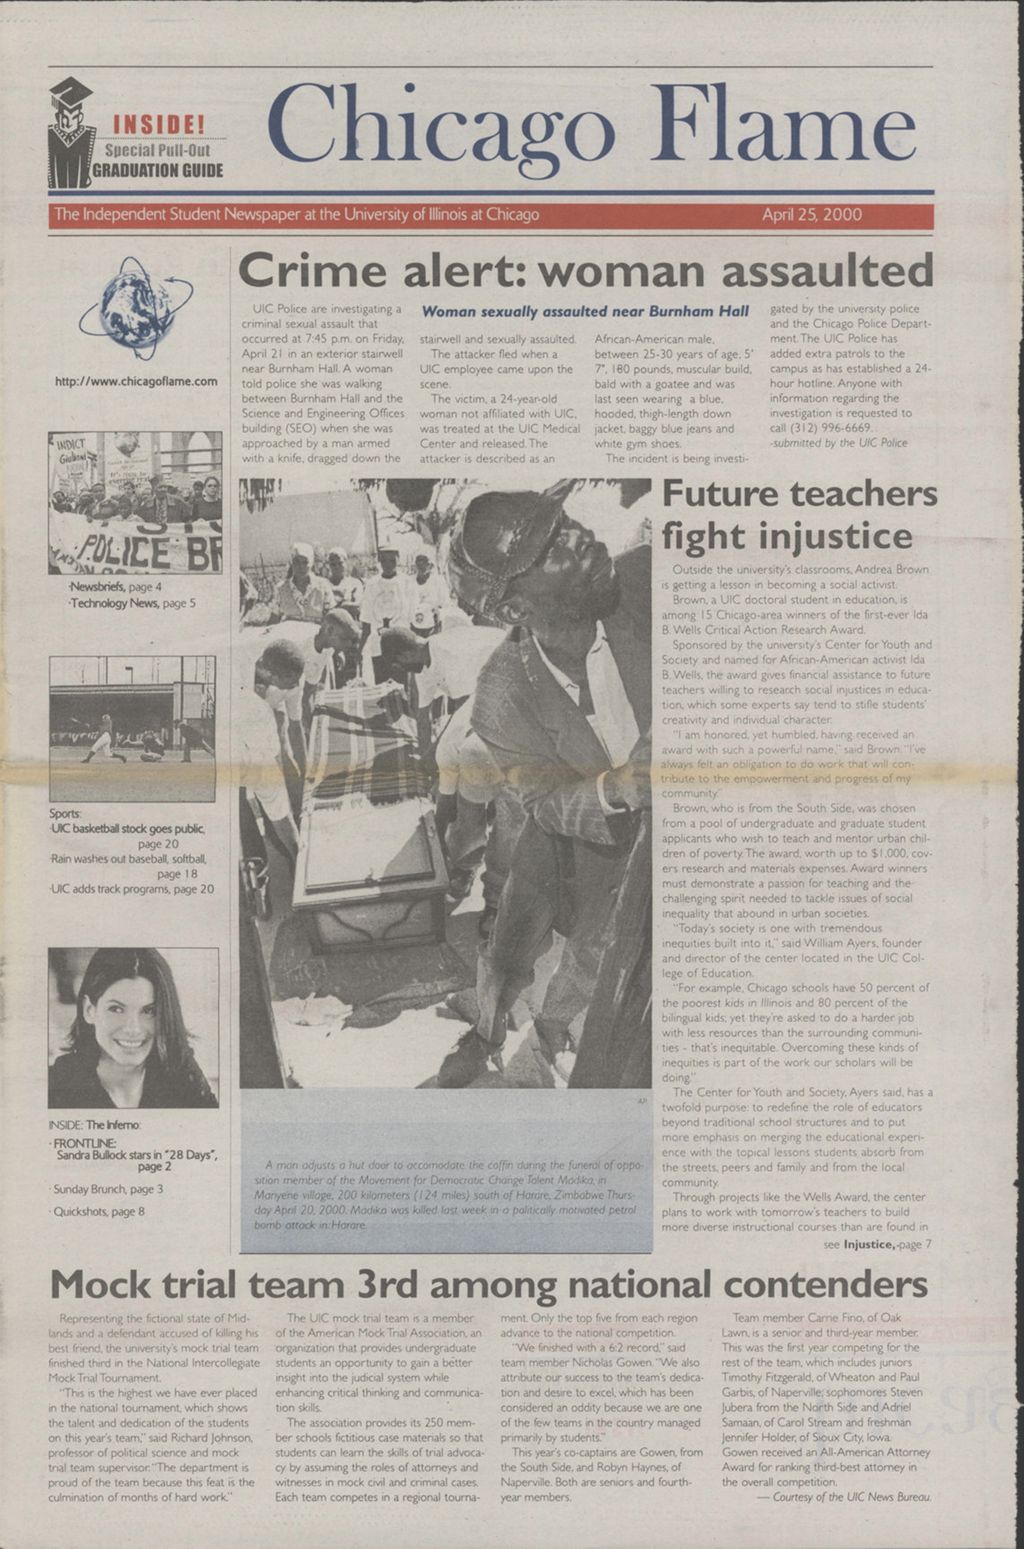 Chicago Flame (April 25, 2000)